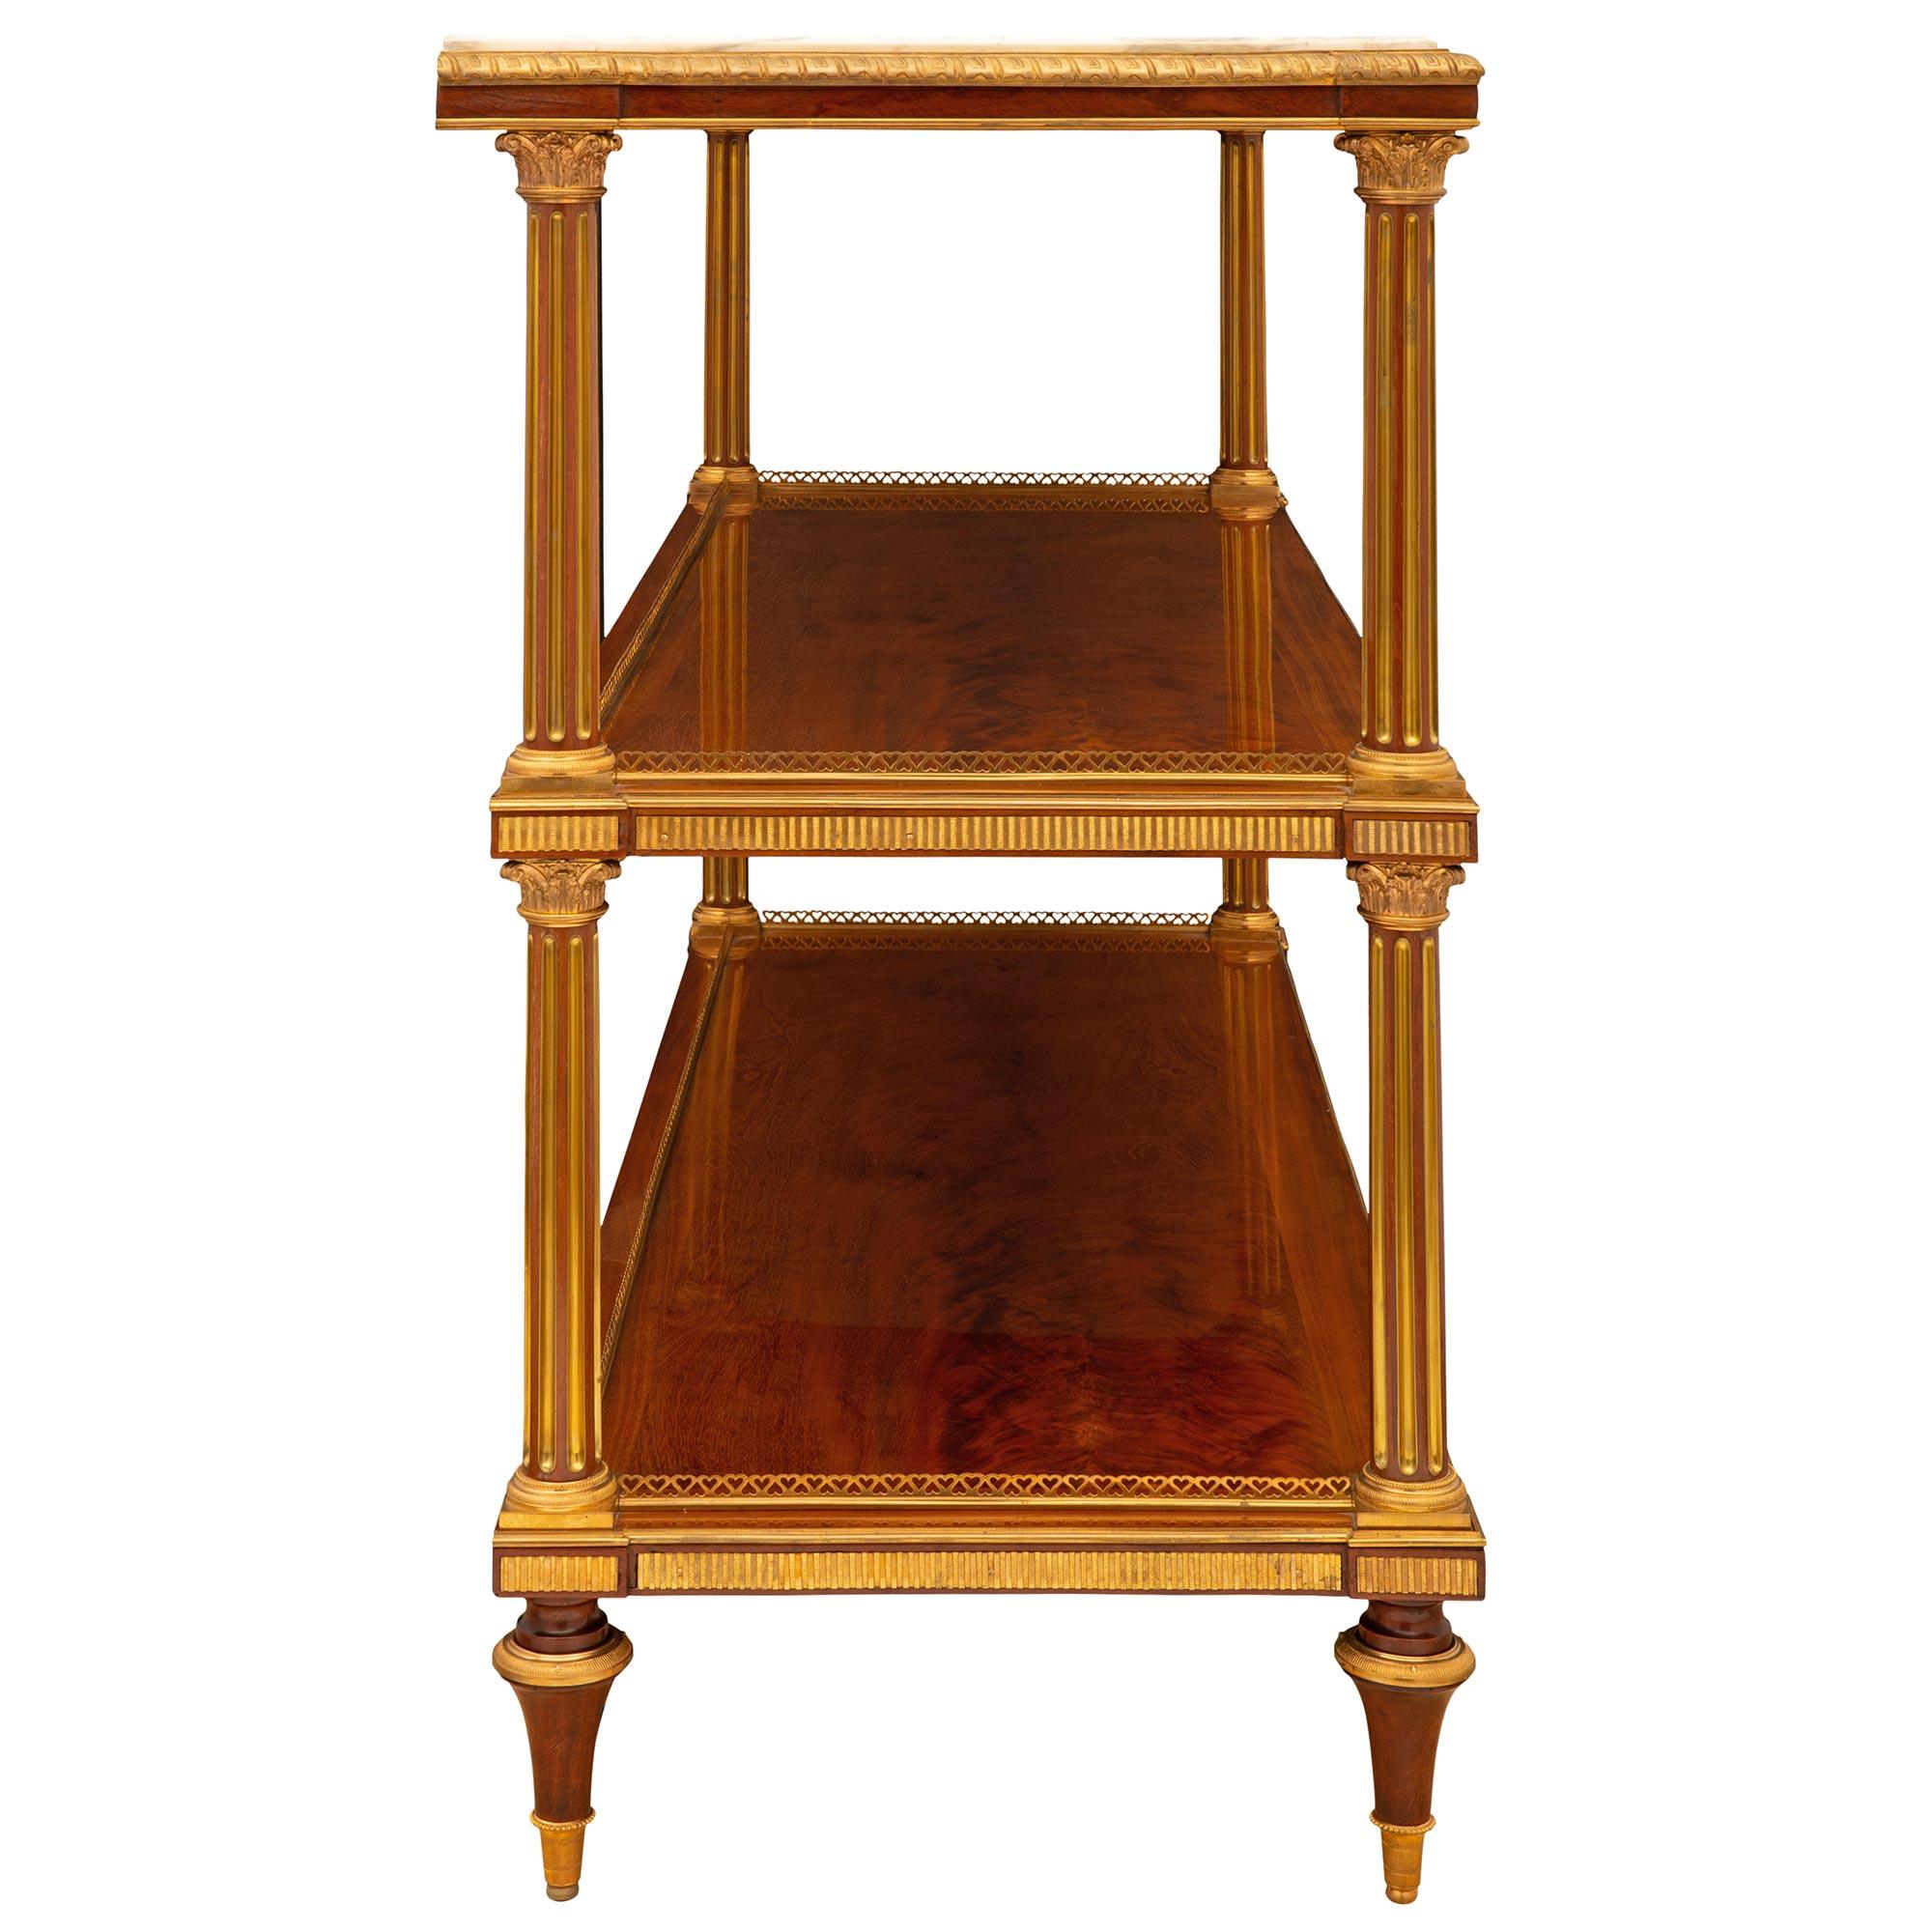 French 19th Century Louis XVI Style Flamed Mahogany and Ormolu Dessert Console For Sale 1